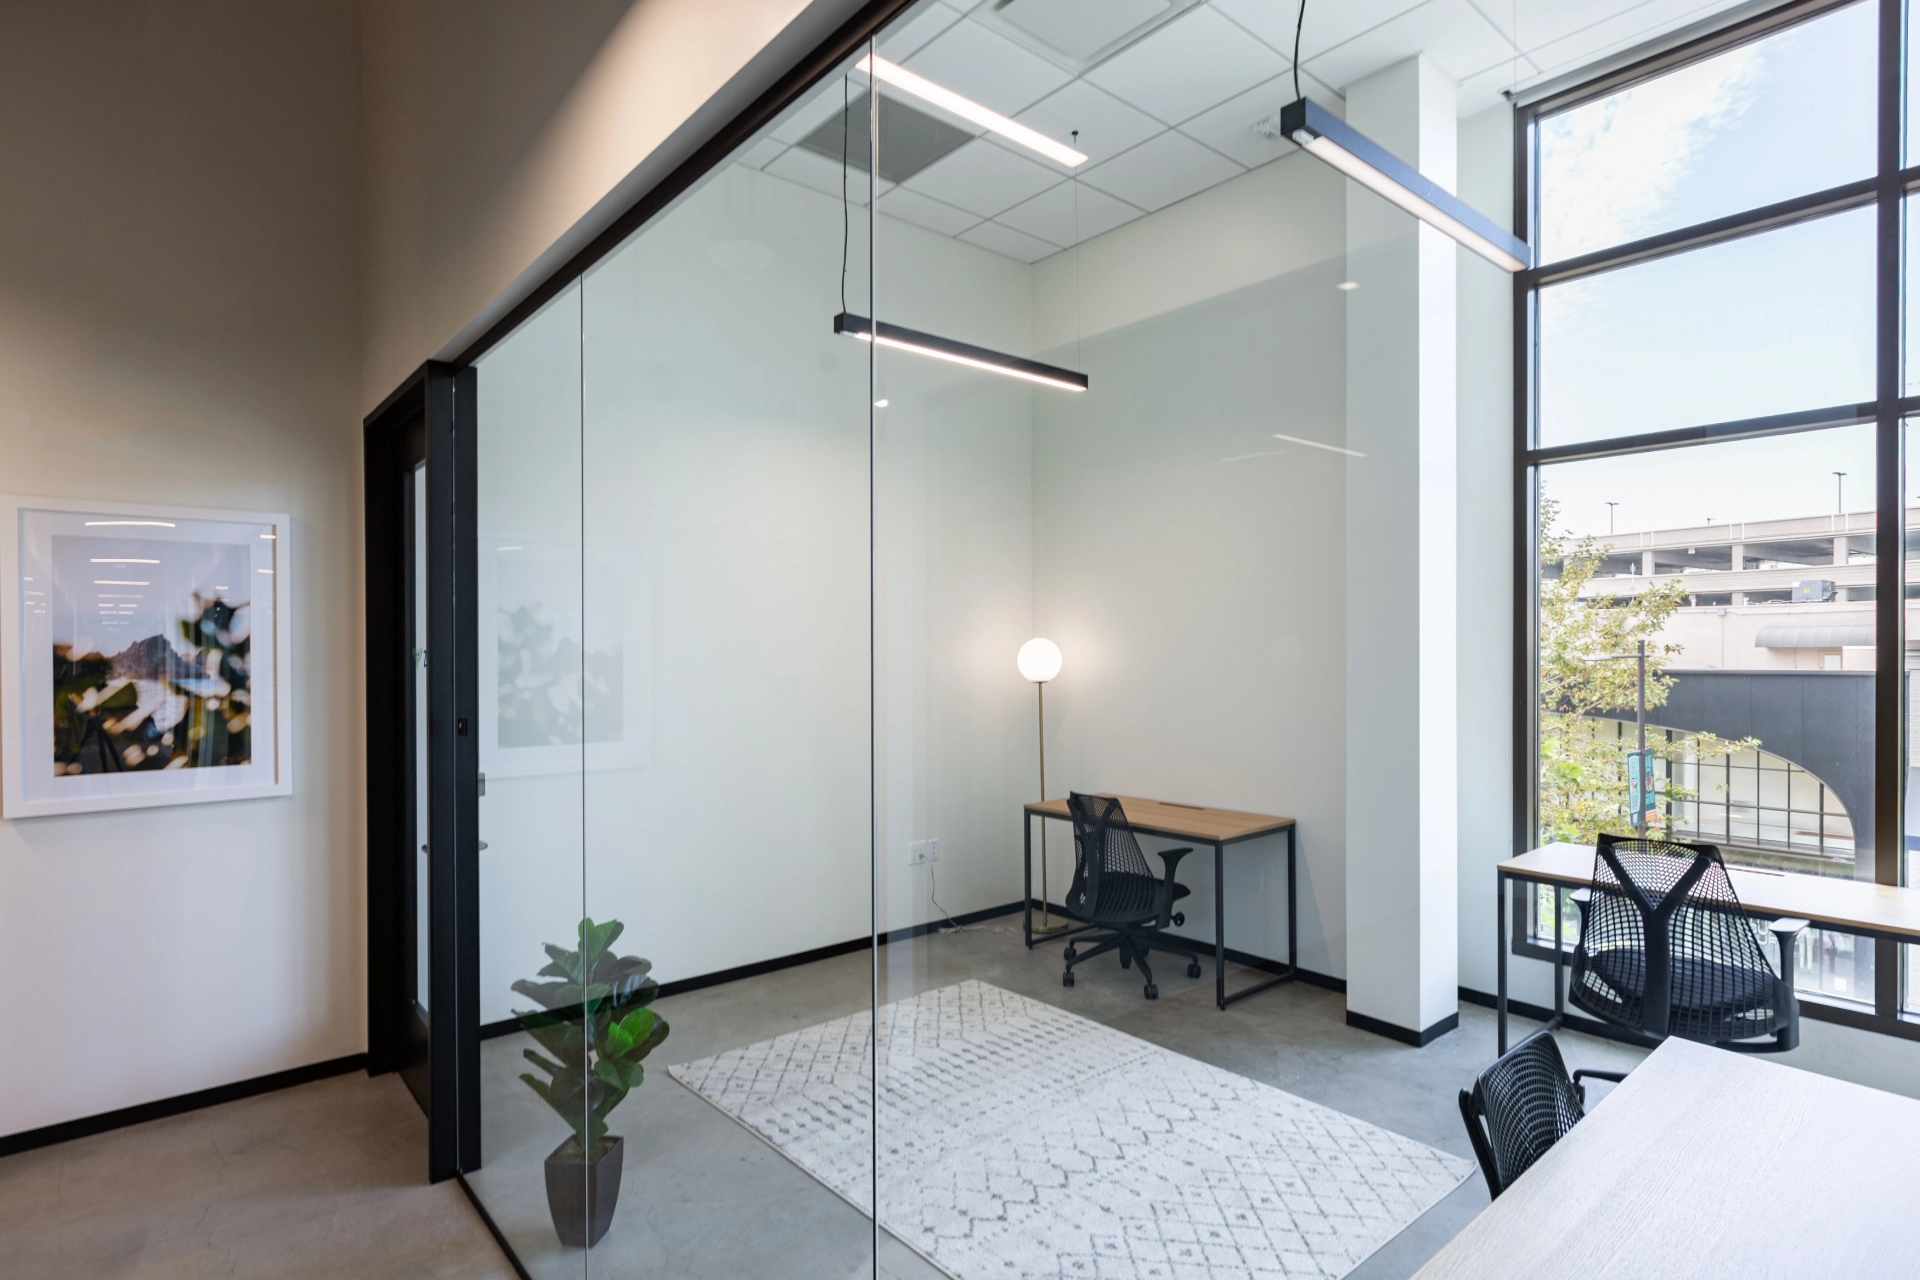 A Walnut Creek coworking space with glass-walled meeting rooms and desks.